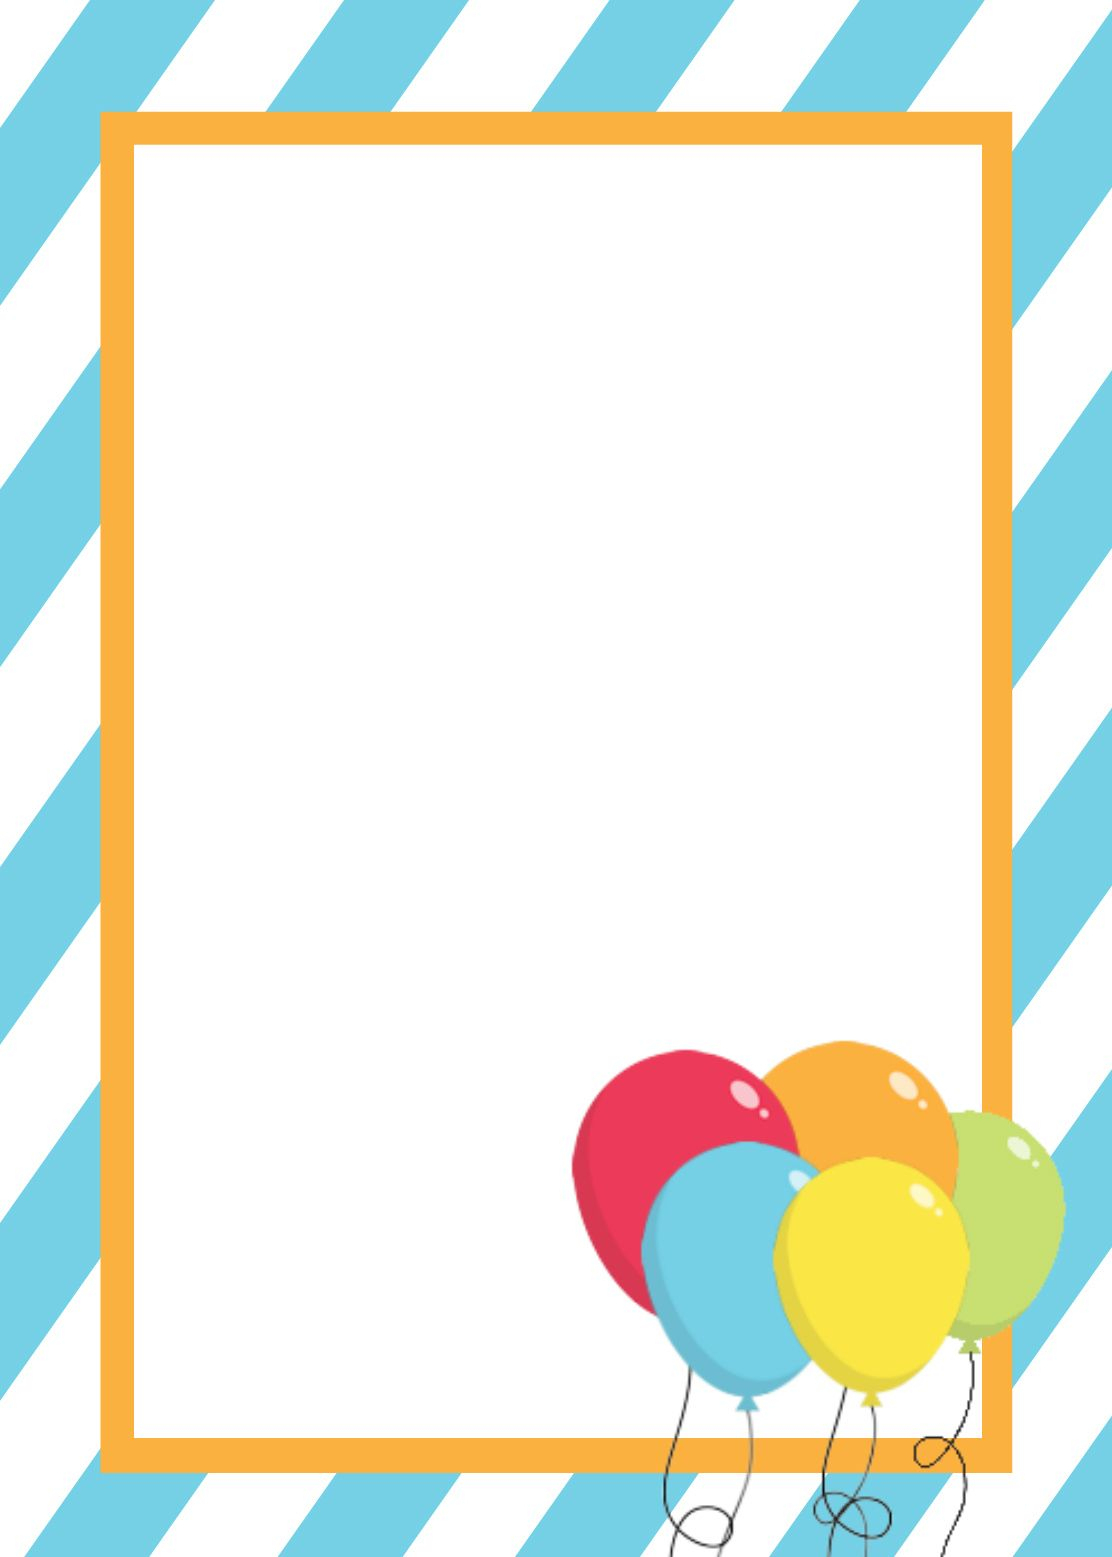 Free Printable Birthday Invitation Templates | Birthday Ideas And - Free Printable Birthday Invitations With Pictures